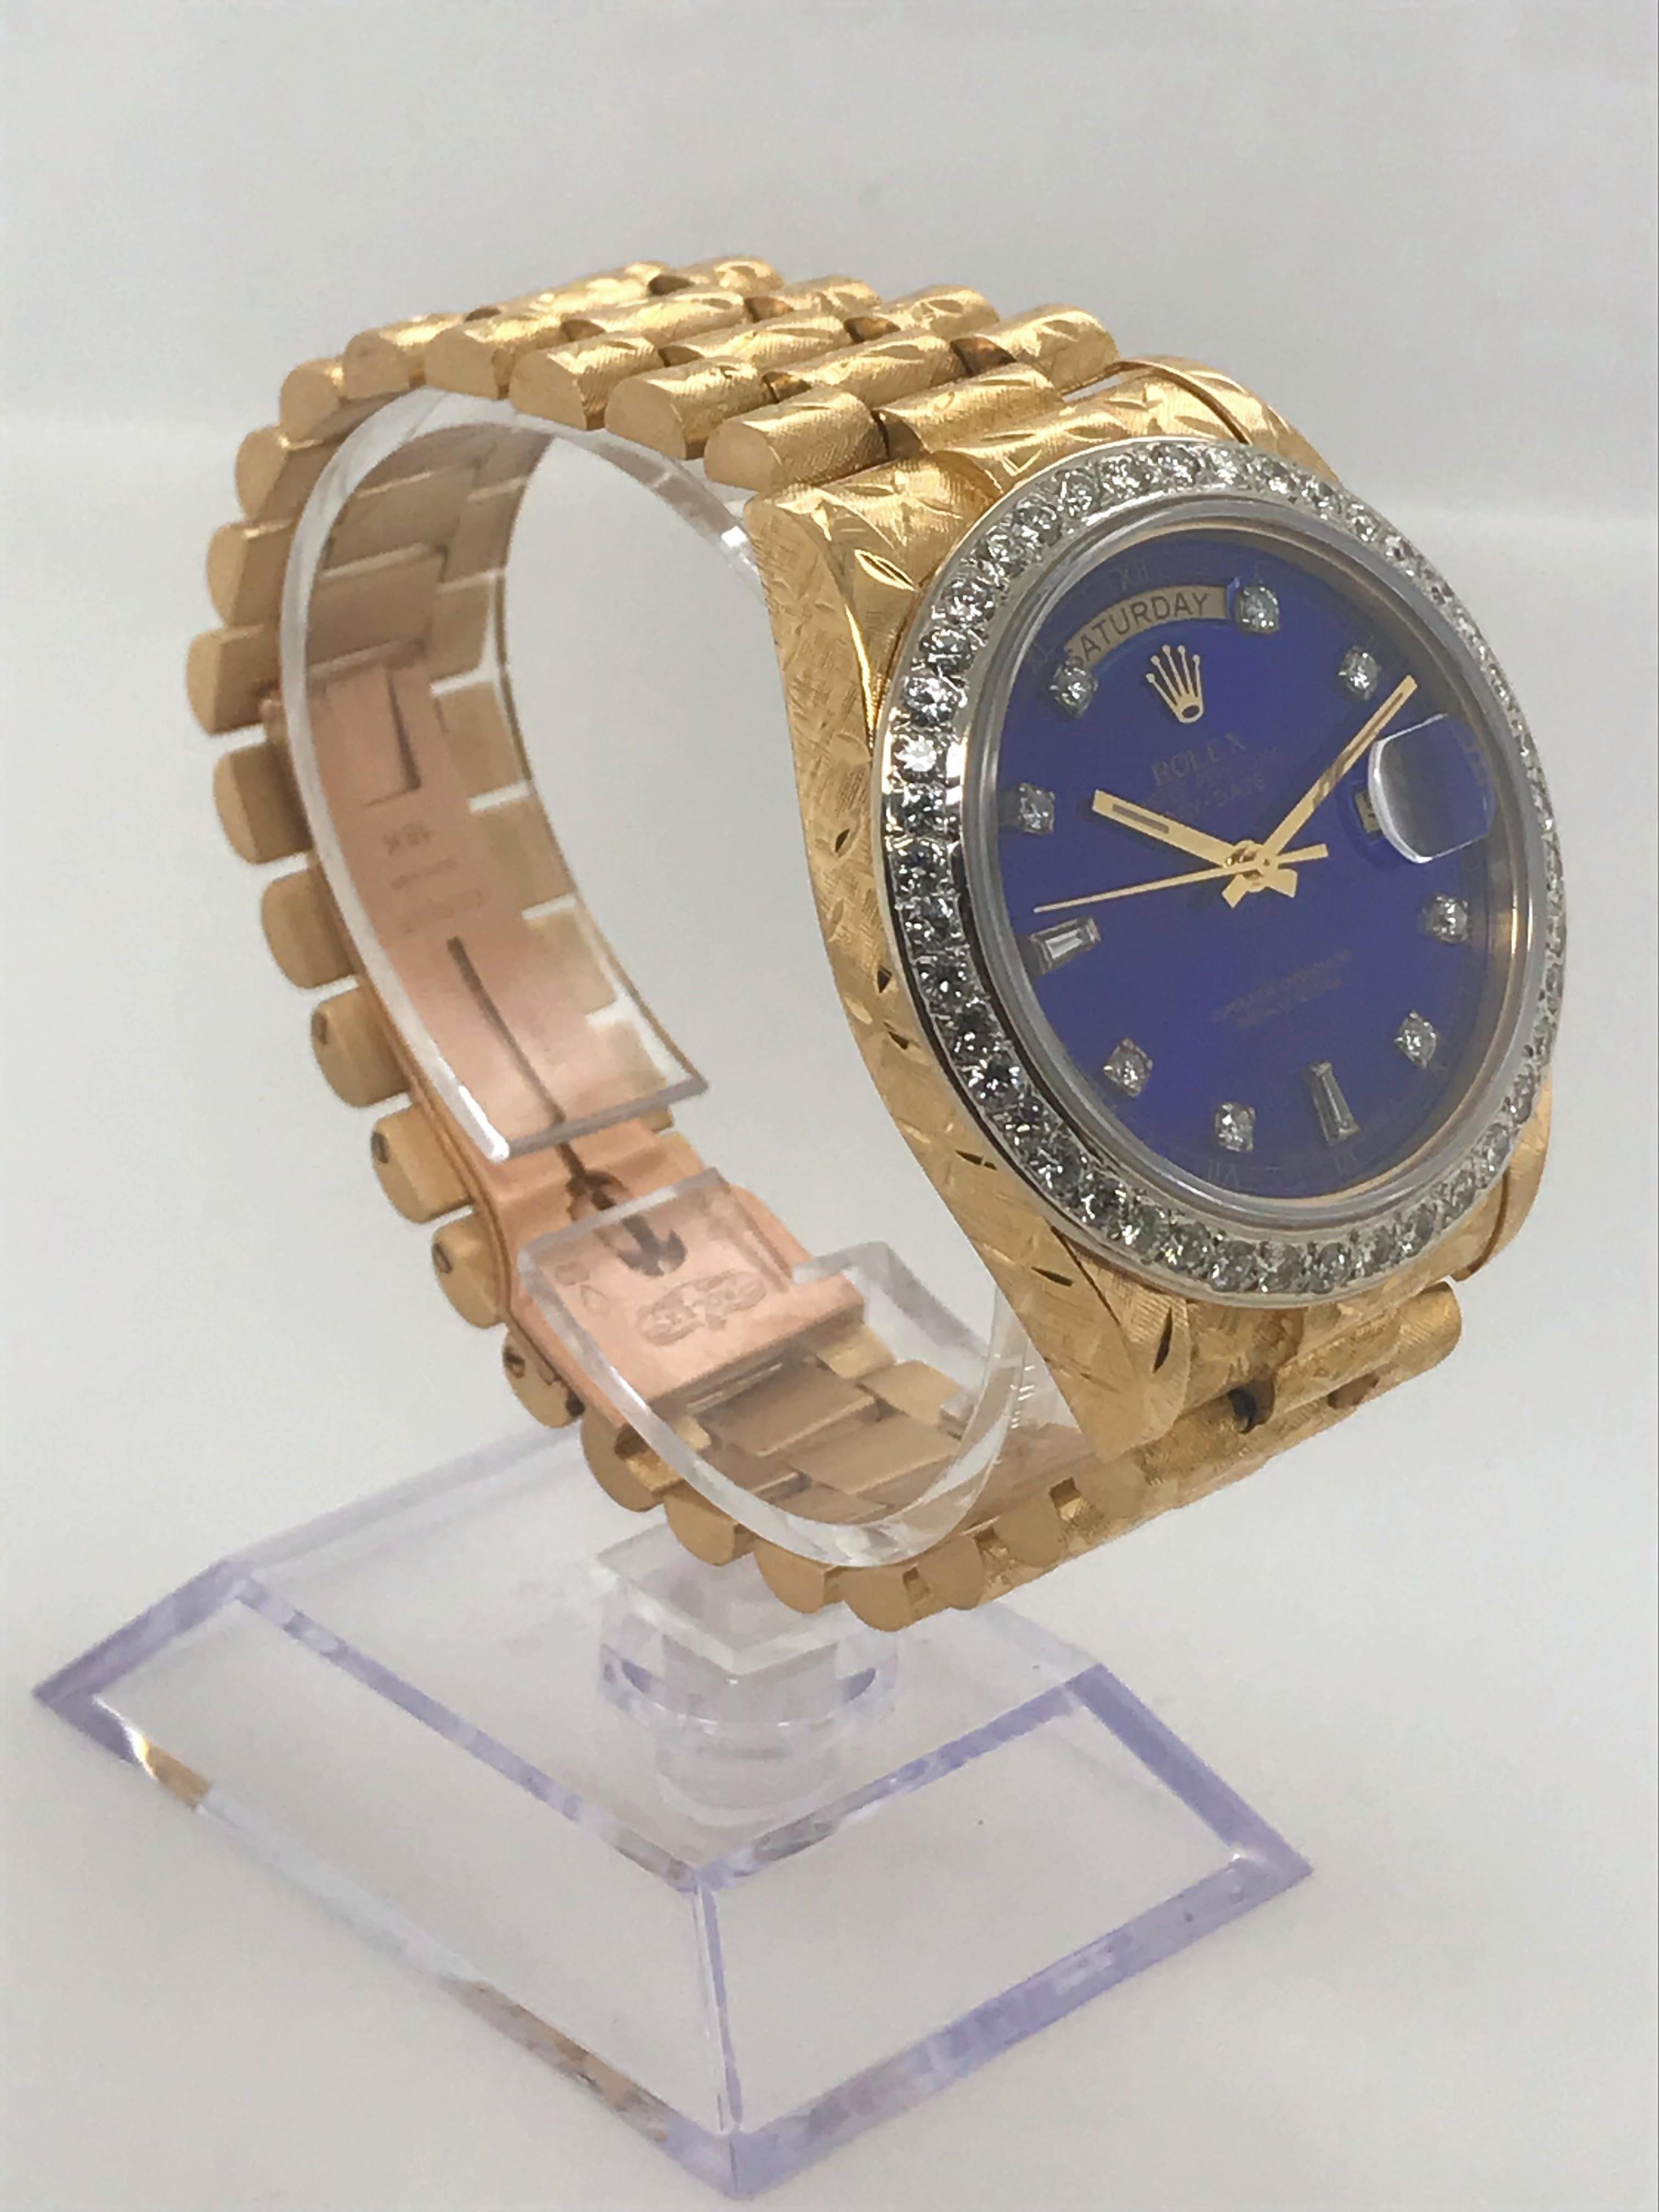 This Rolex Day-Date is on a Presidental bracelet. The case and Bracelet are engraved 18 karat yellow gold. This watch features a blue dial with diamond markers and diamond bezel.  Circa 1983.

This watch was recently serviced and authenticated by a